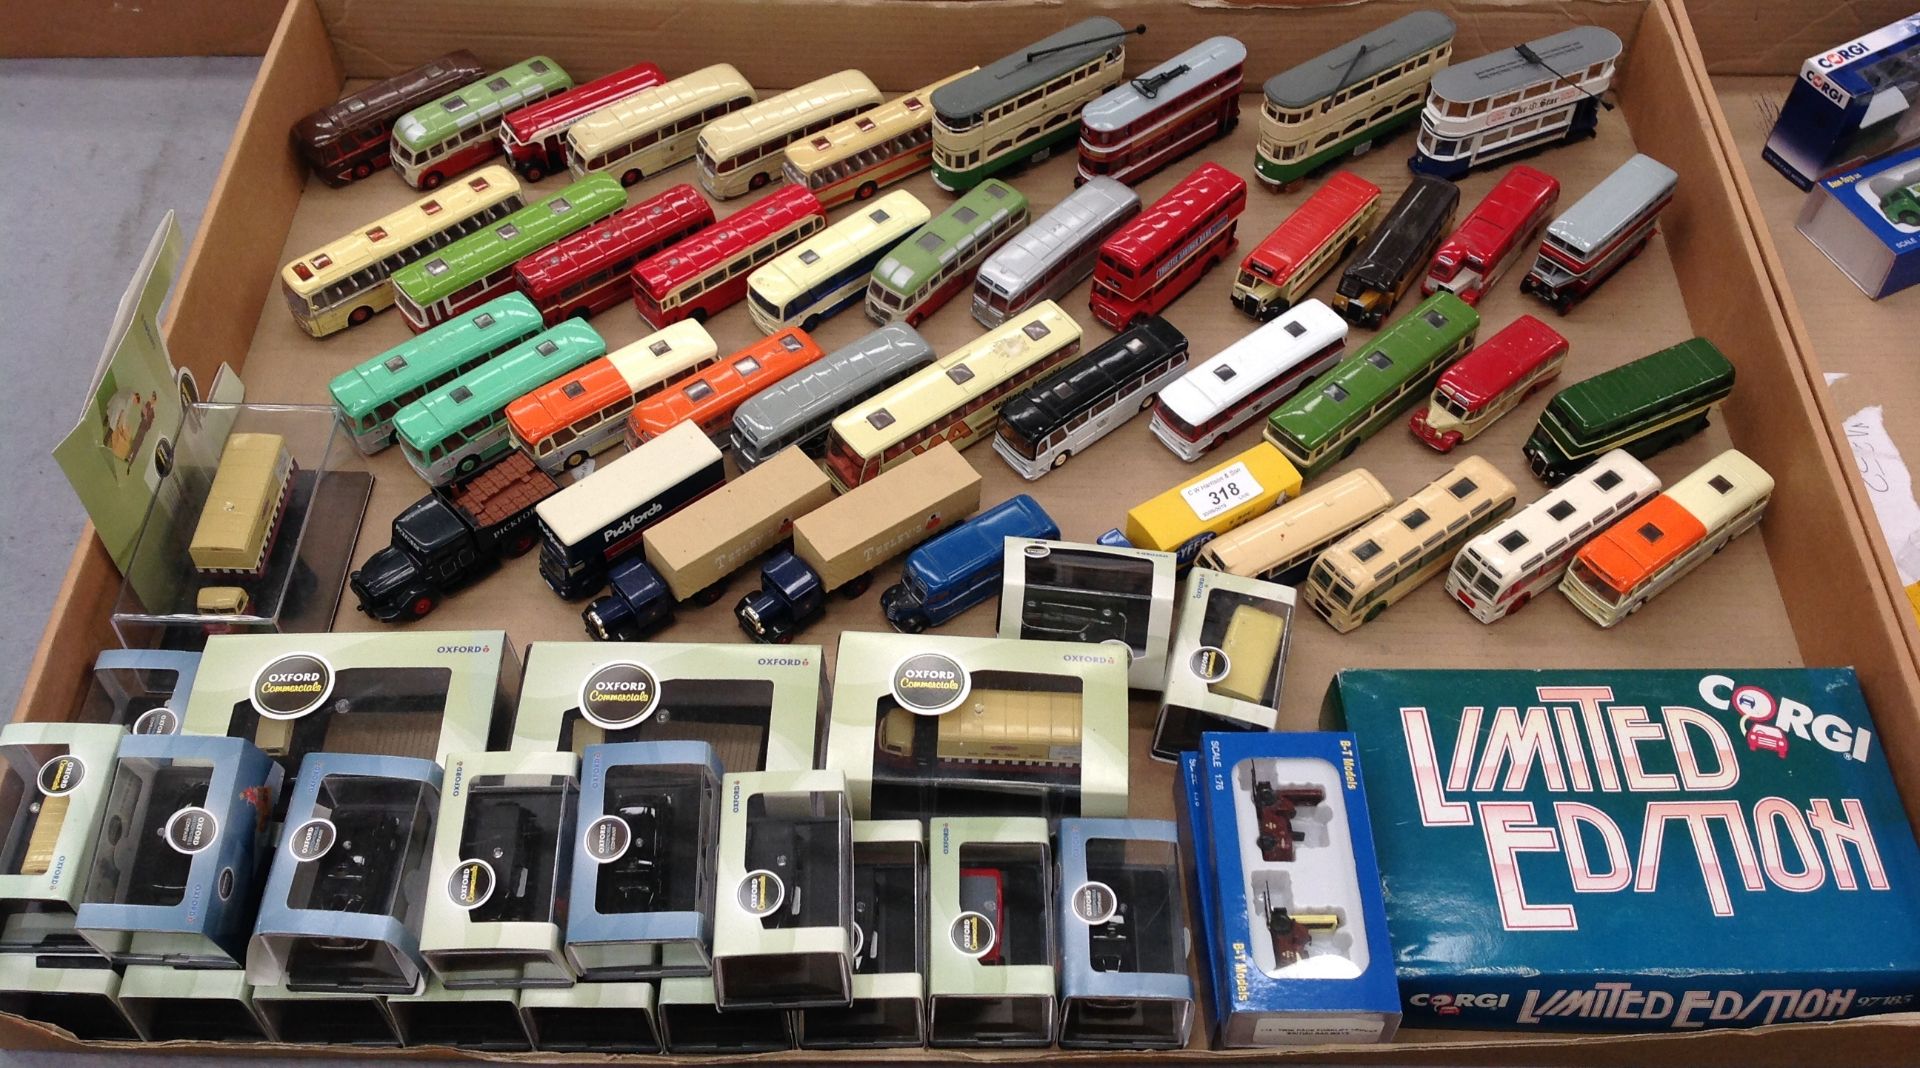 Contents to tray approximately sixty five diecast miniature scale model buses, trams, commercials,